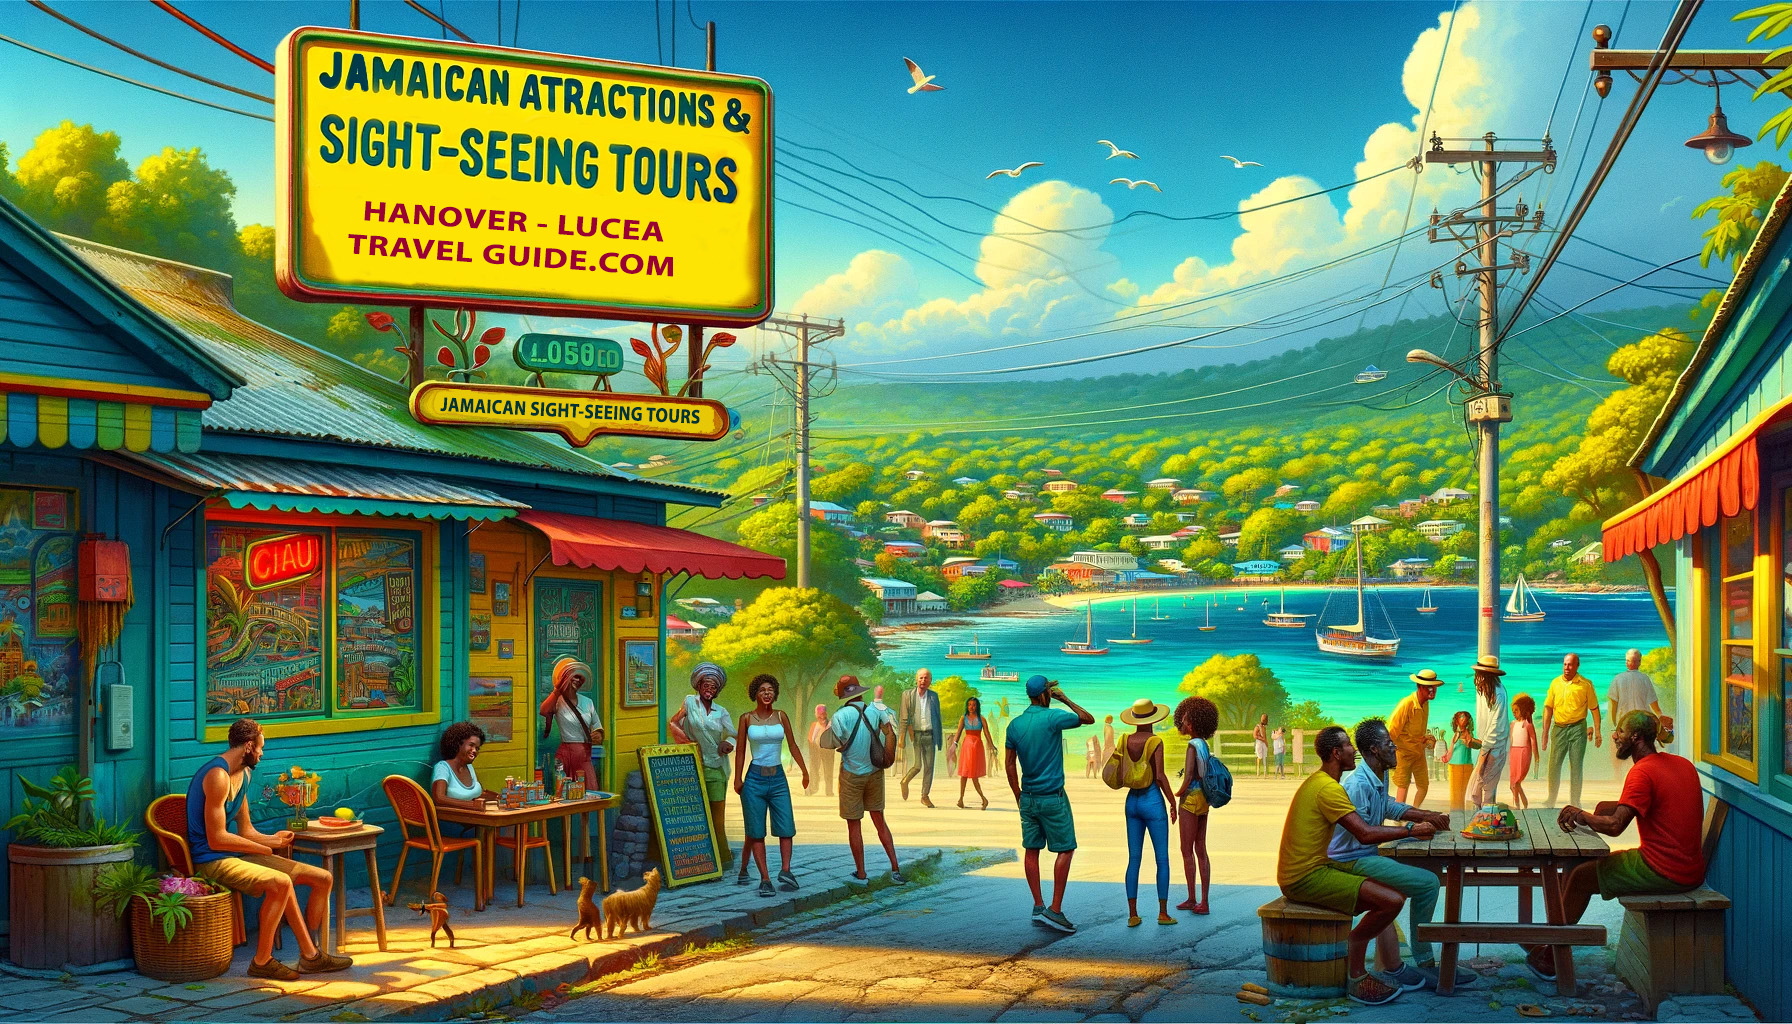 Jamaican Attractions - Sight-Seeing Tours - Hanover - Lucea Travel Guide